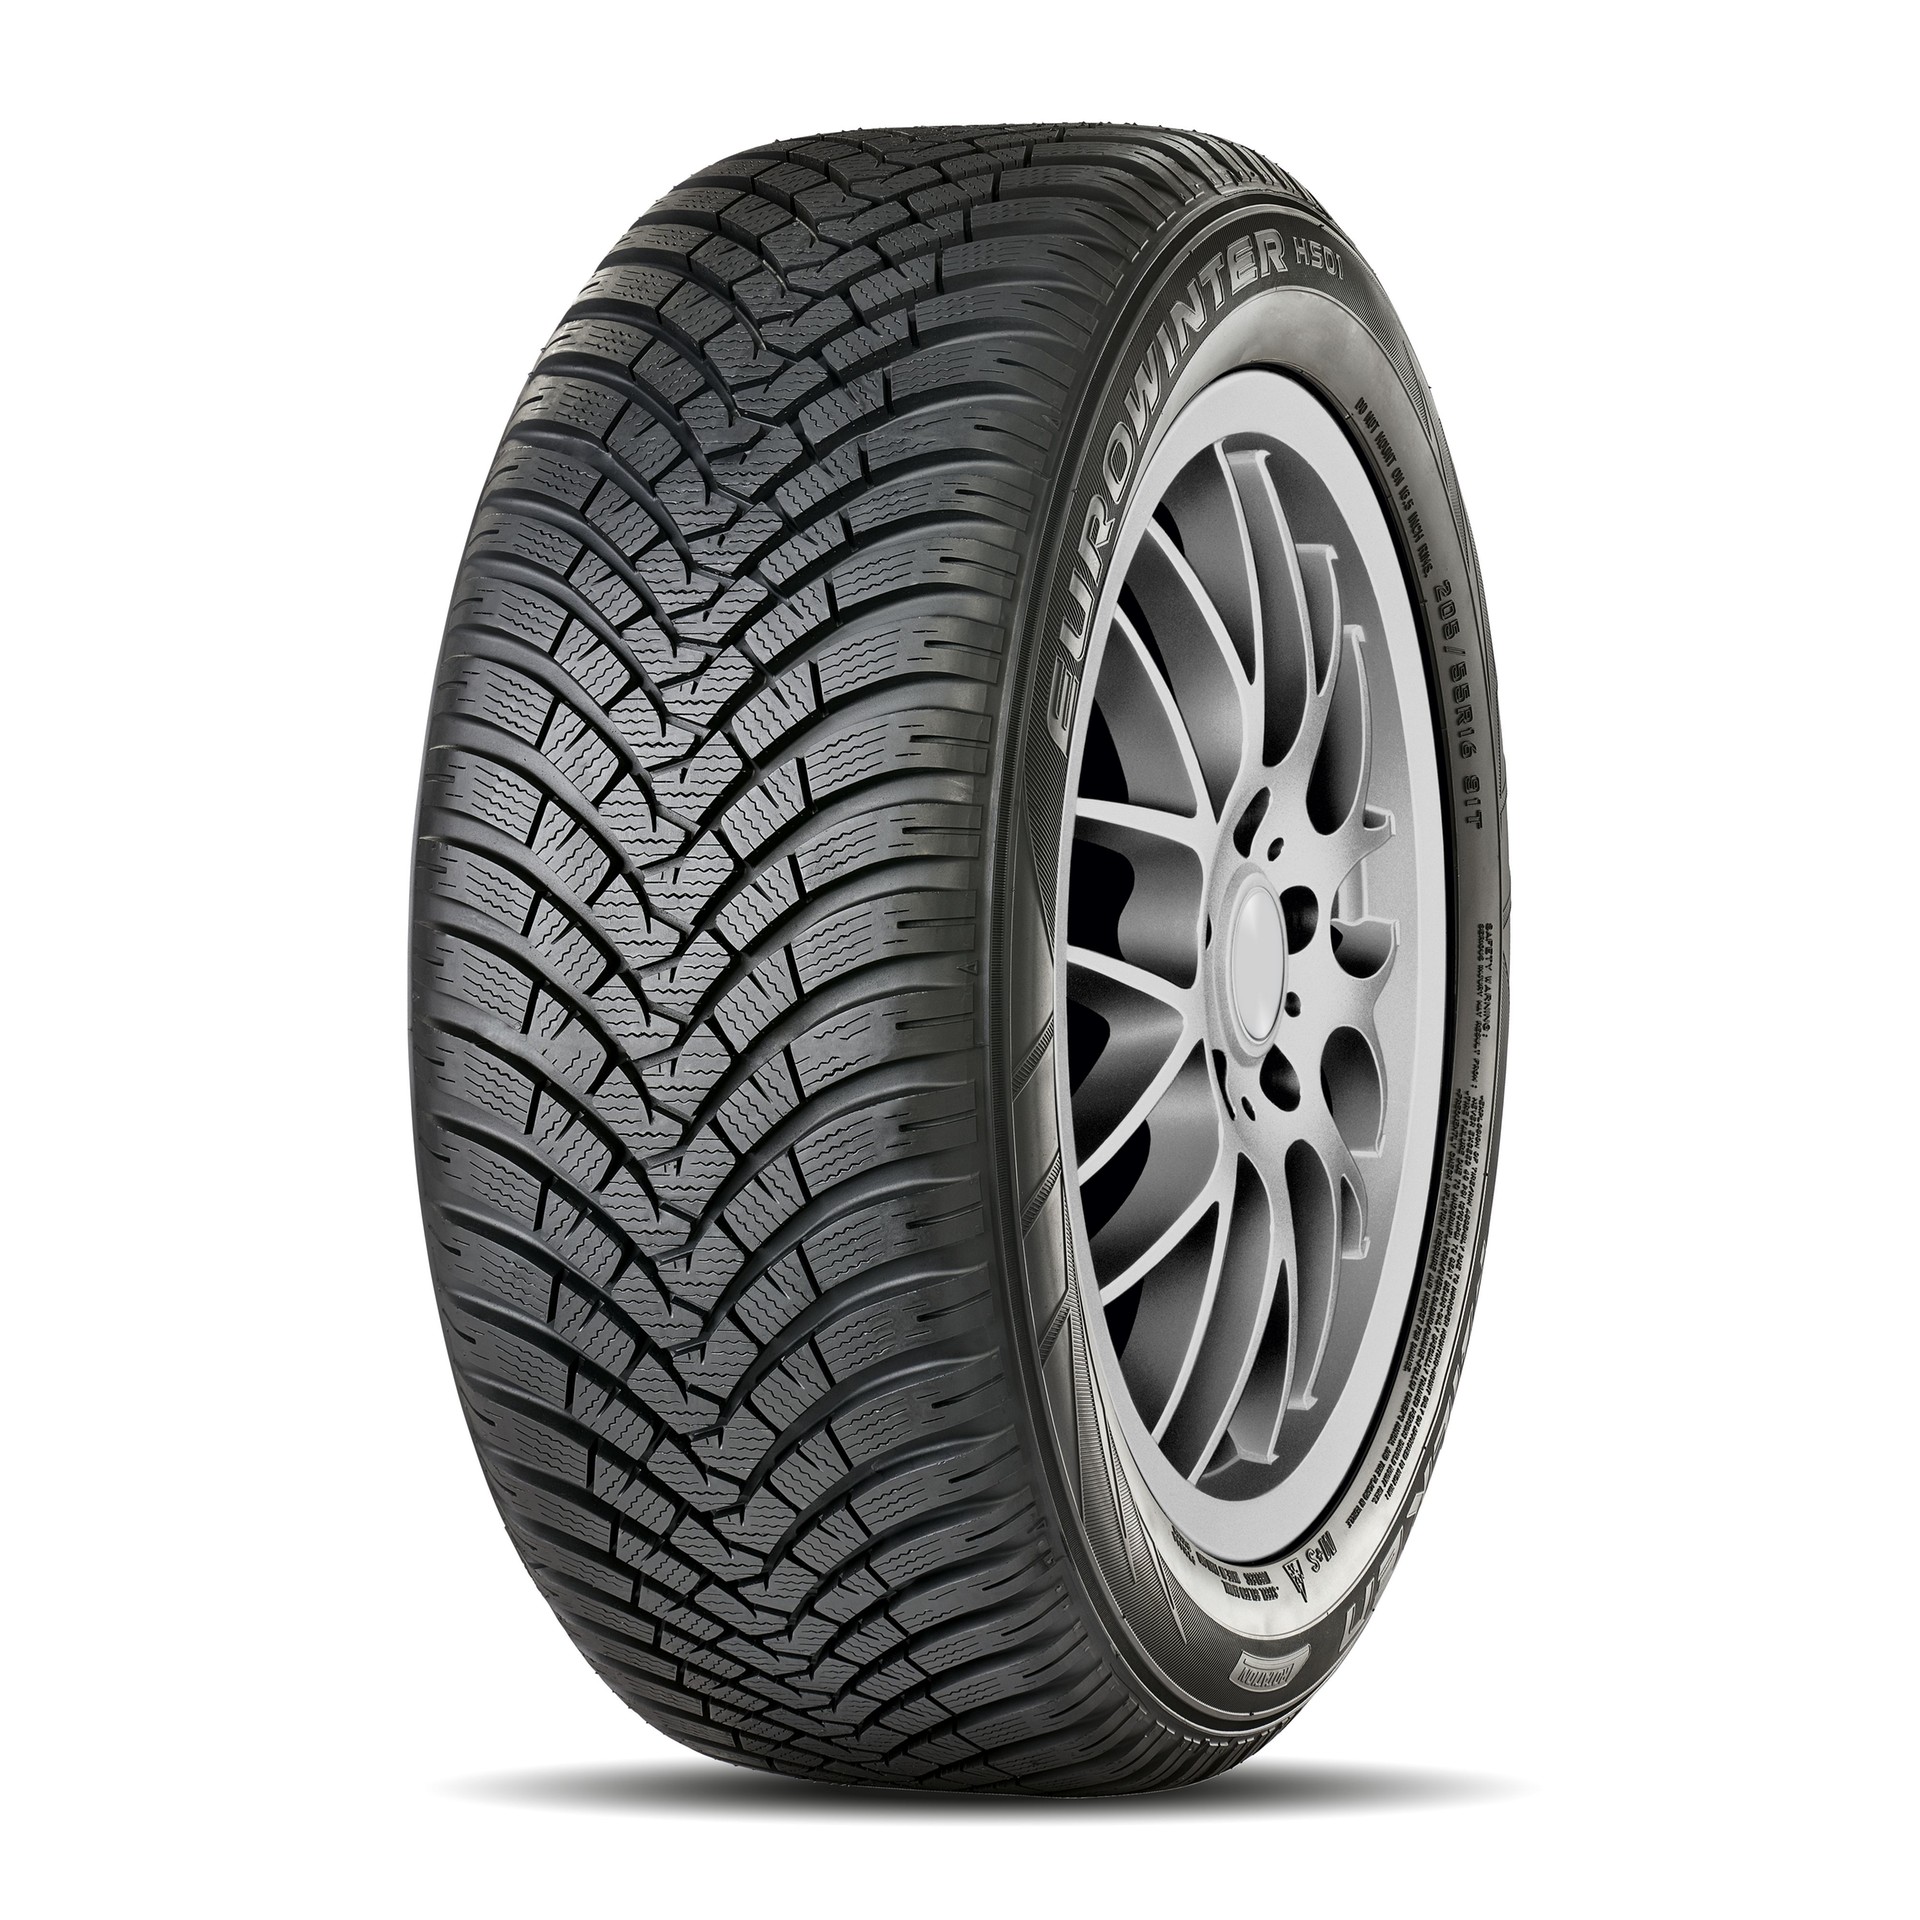 Falken Eurowinter and Tire HS01 - Reviews Tests